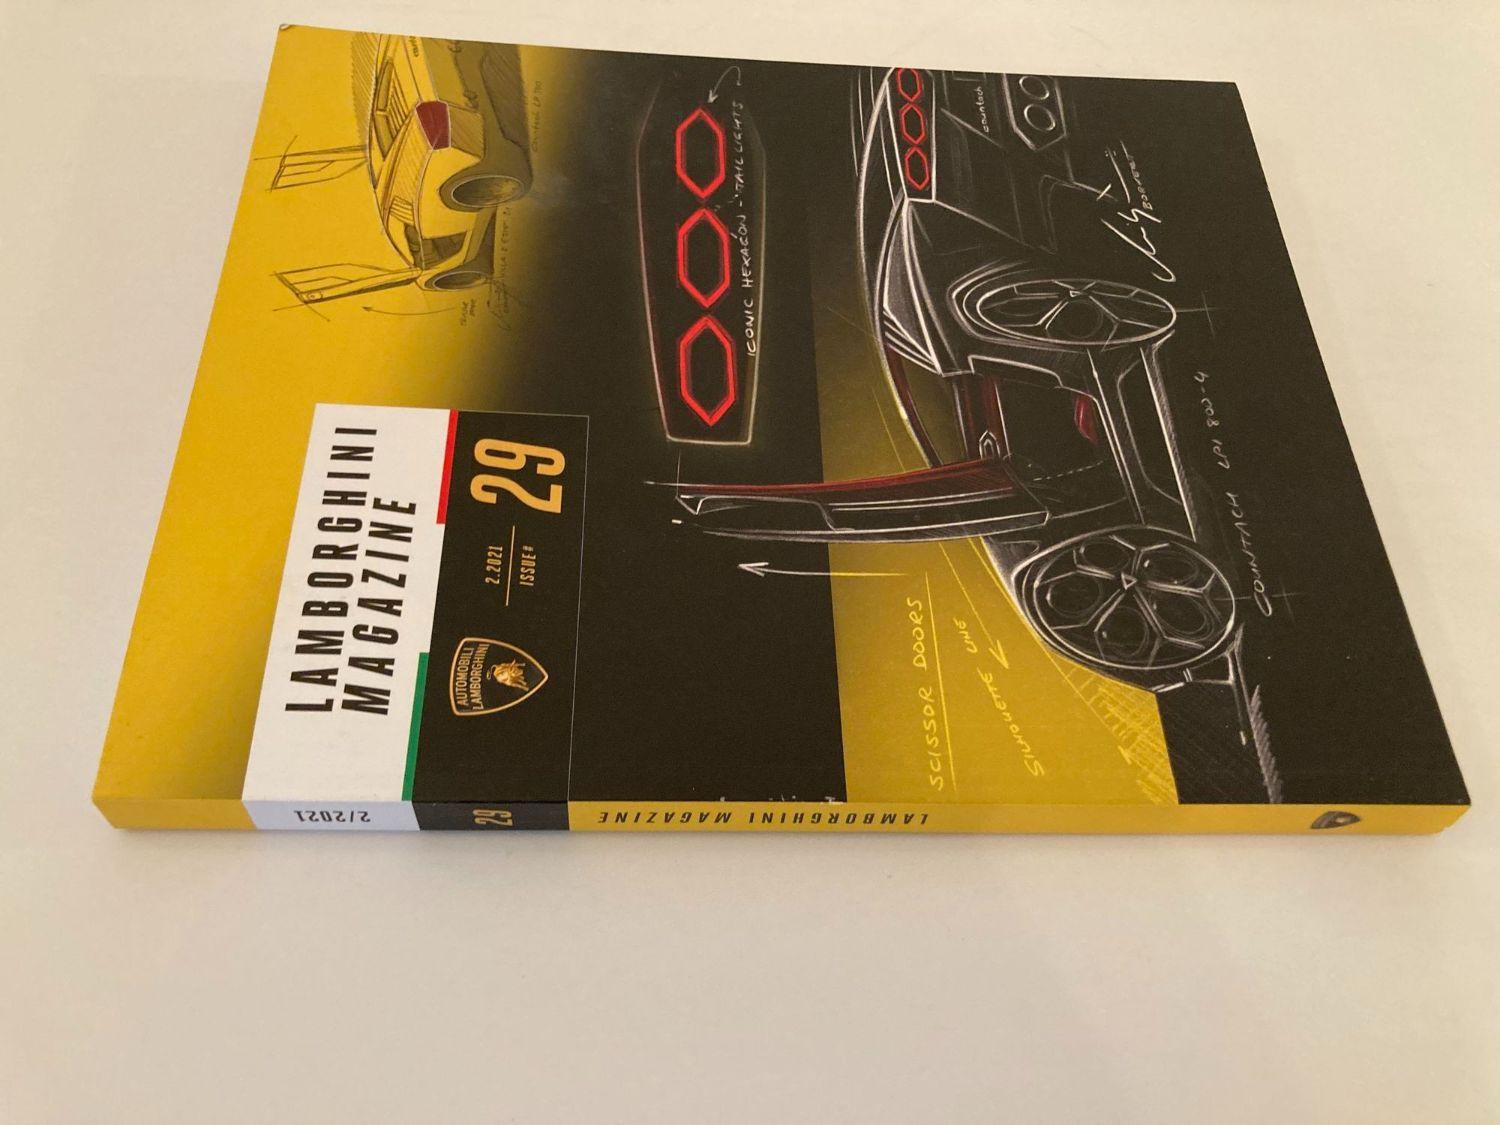 Lamborghini Magazine Issue #29 Febuary 2021.
Featuring the 50th anniversary of the legendary Countach. 
Exploring the concept of time from several perspectives with unmissable interviews and in-depth articles.
Great condition, coffee table book